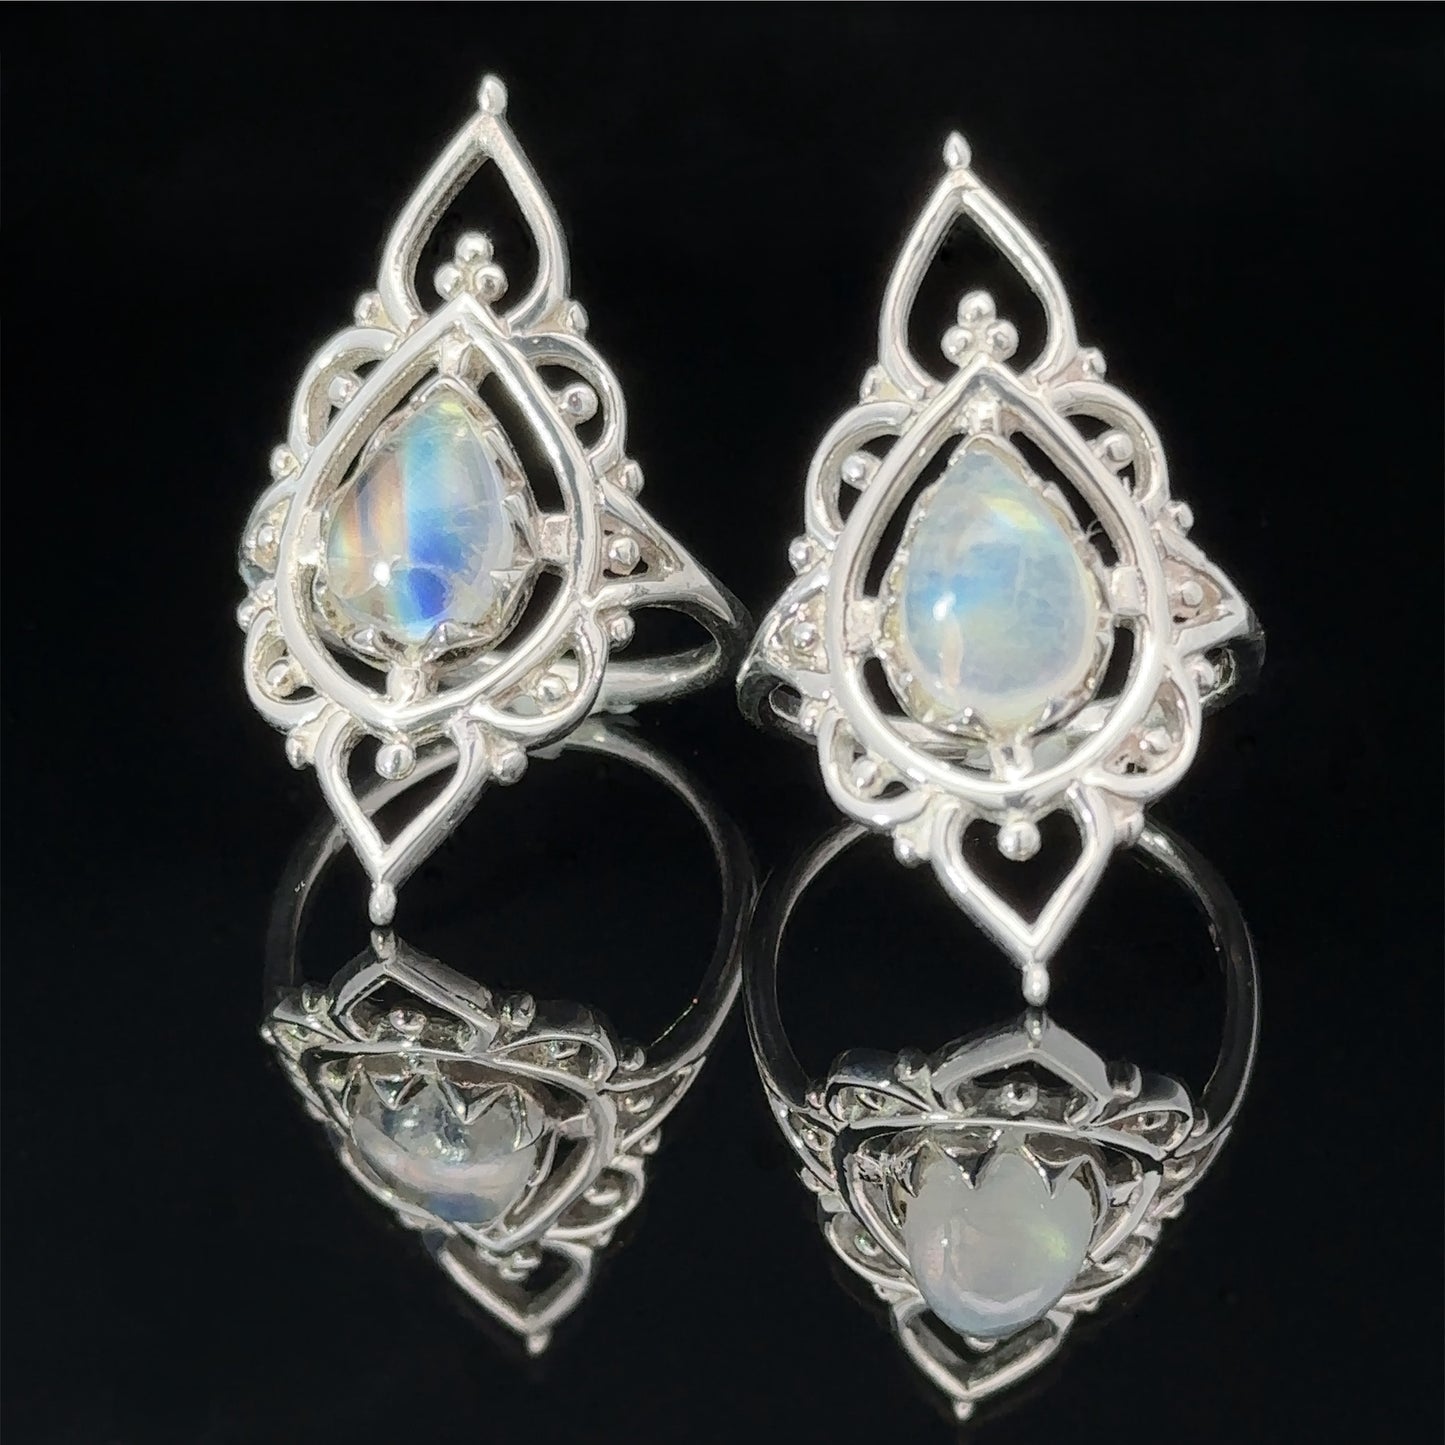 A pair of ornate silver earrings with Online Only Exclusive Designer Moonstone Ring gemstones, displayed on a reflective black surface.